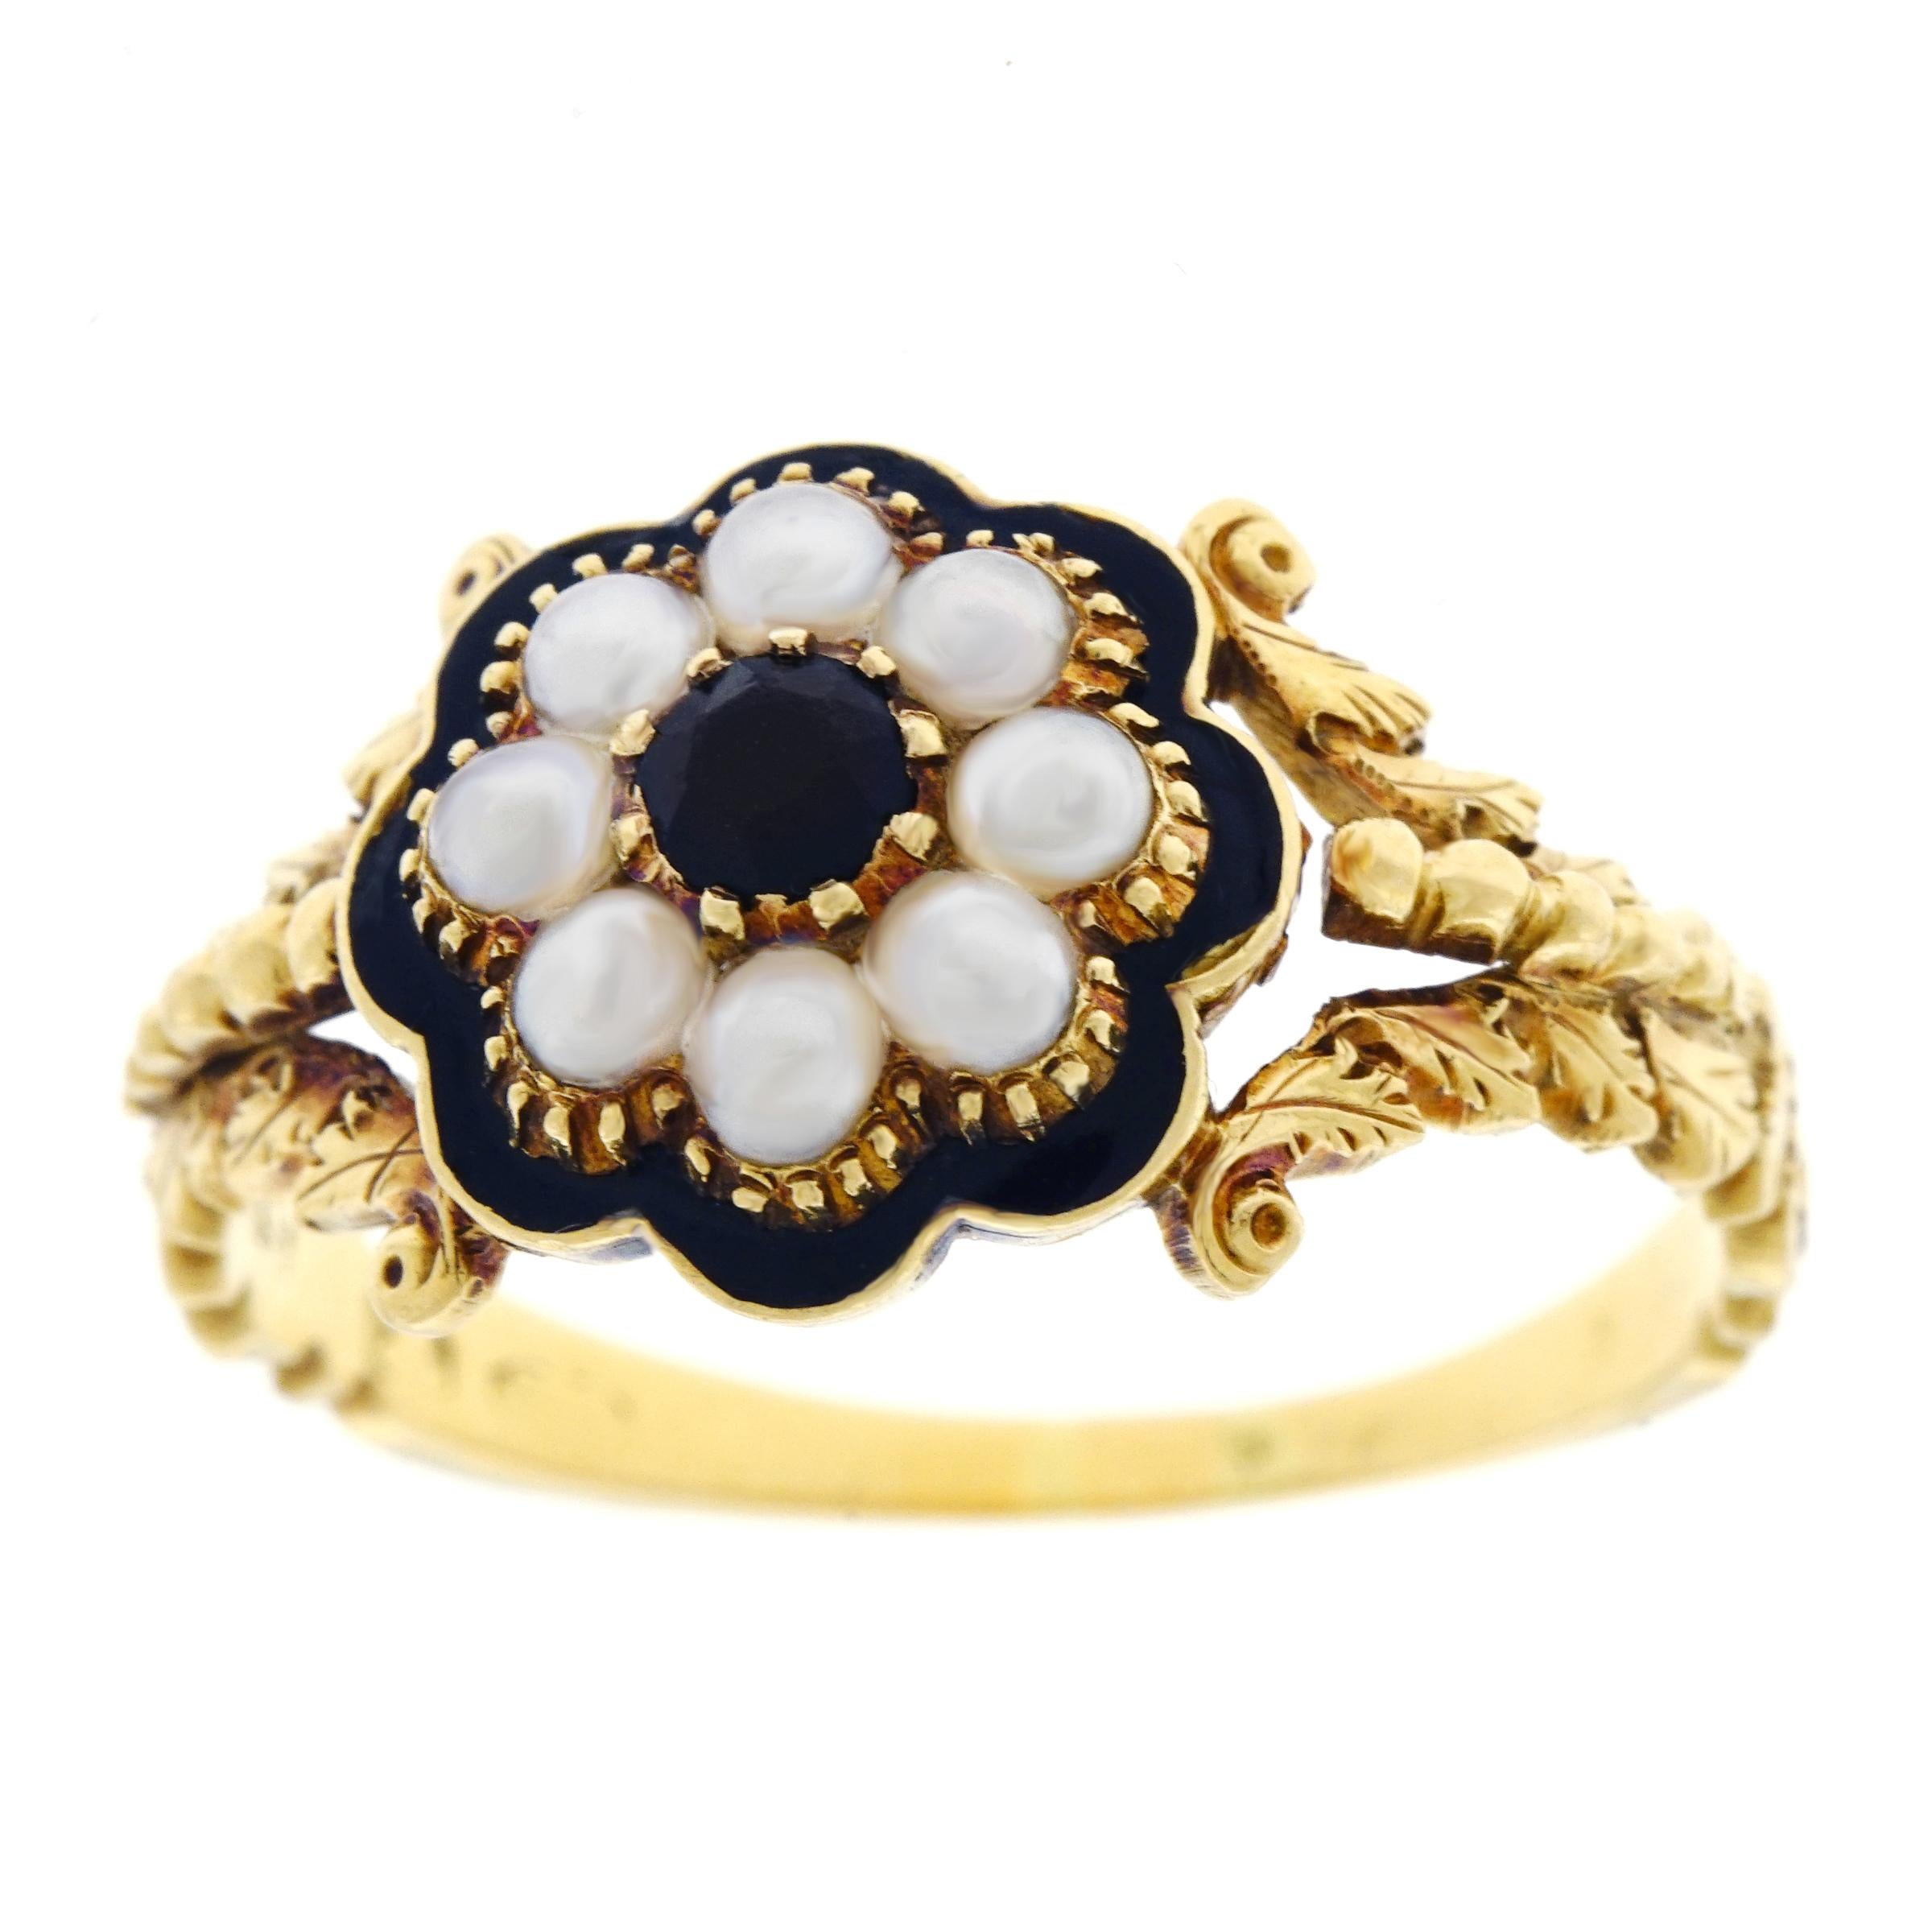 Antique Georgian Natural Pearl, Onyx, and Enamel Gold Ring